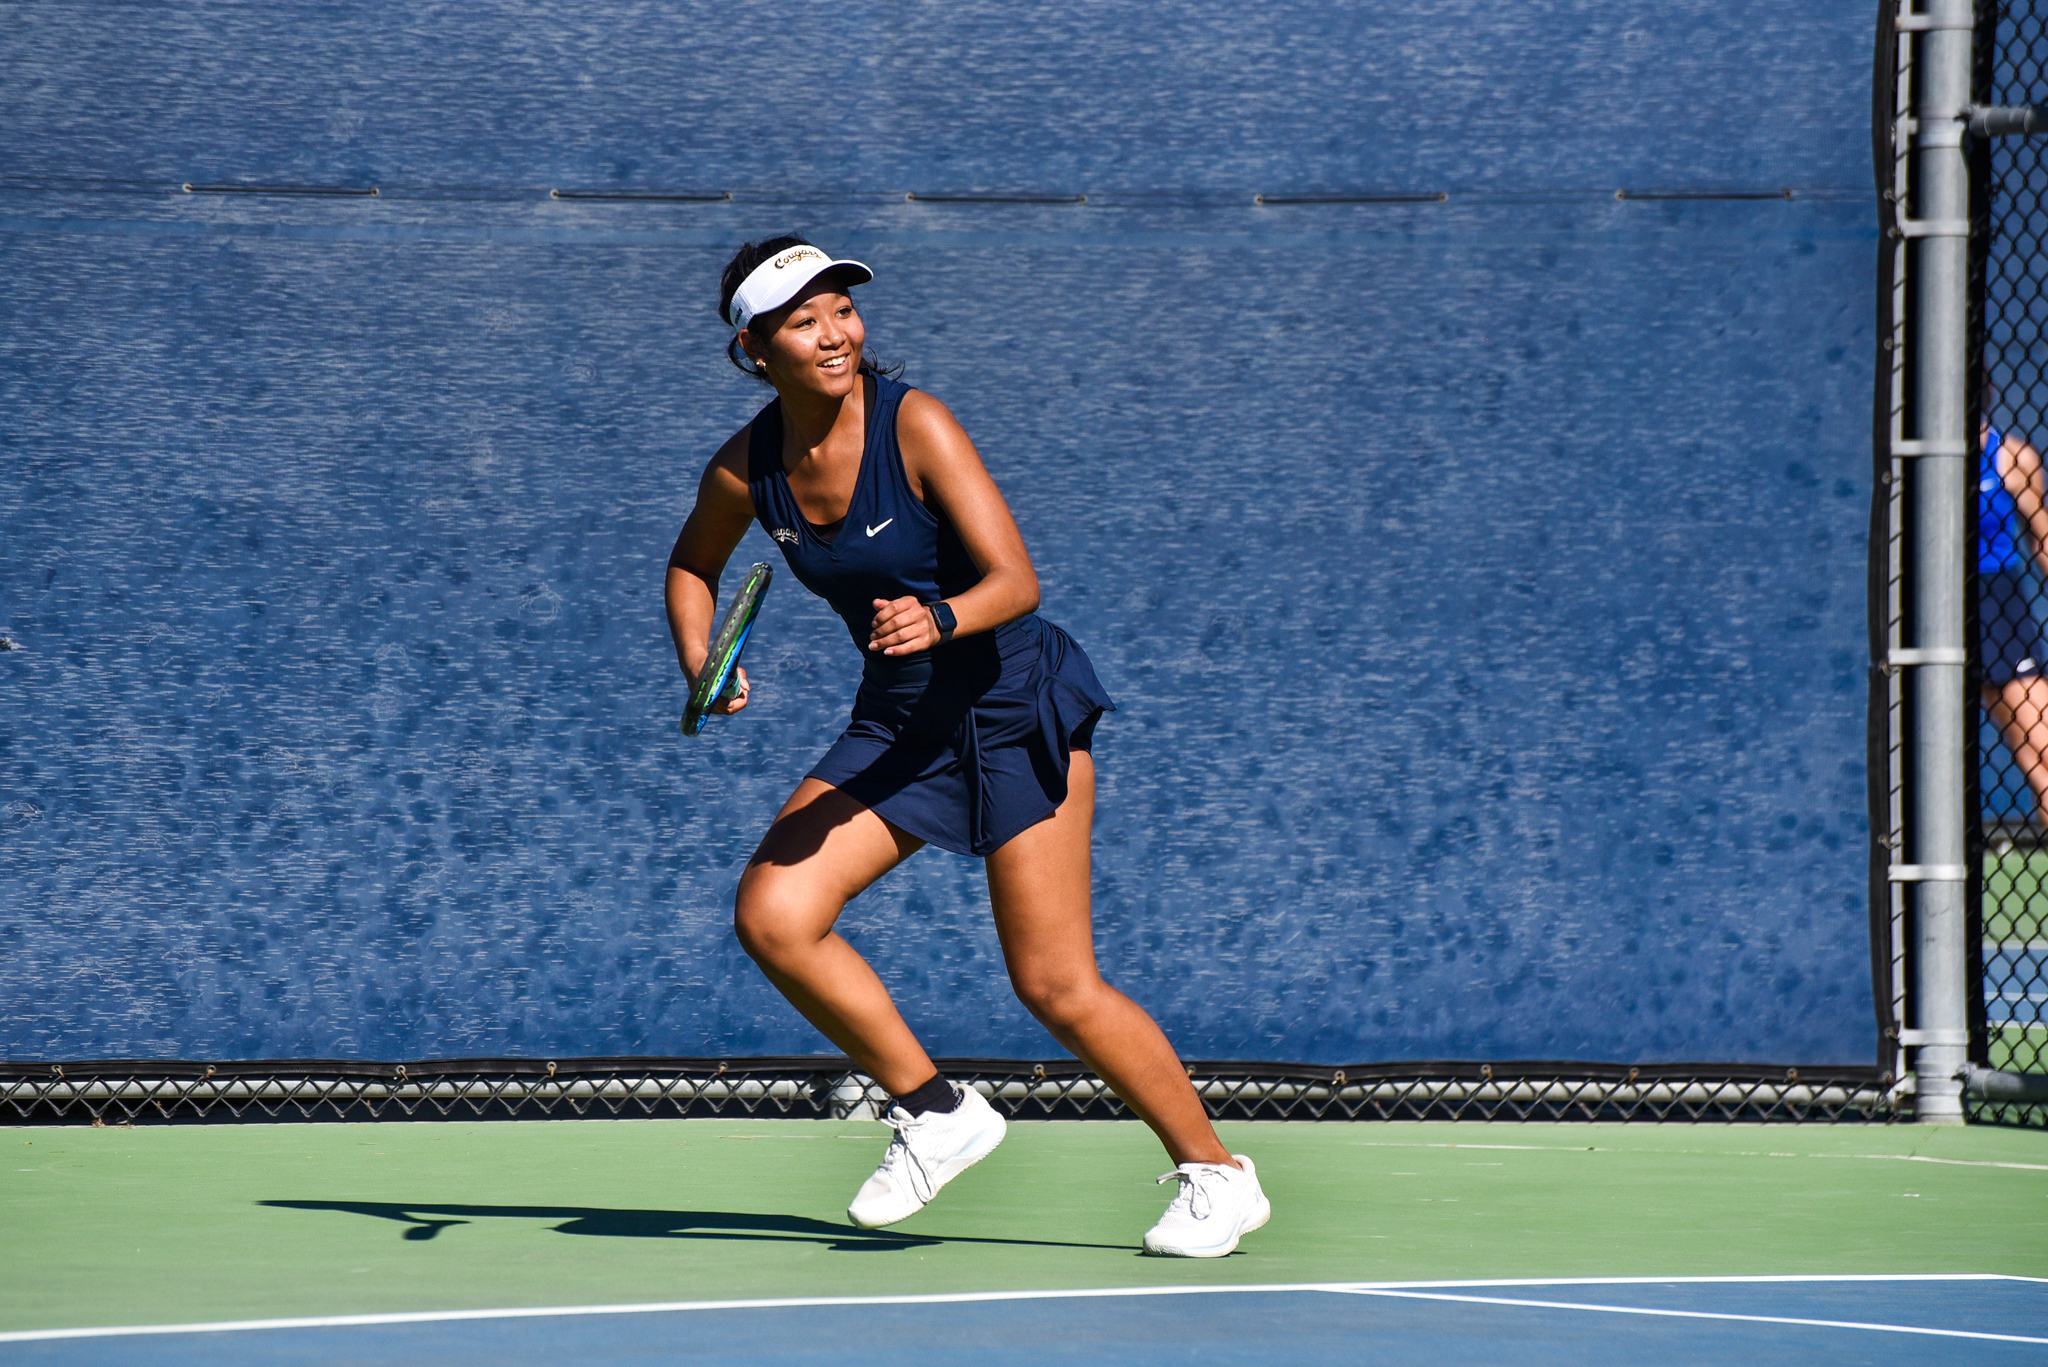 College of the Canyons women's tennis stock image.